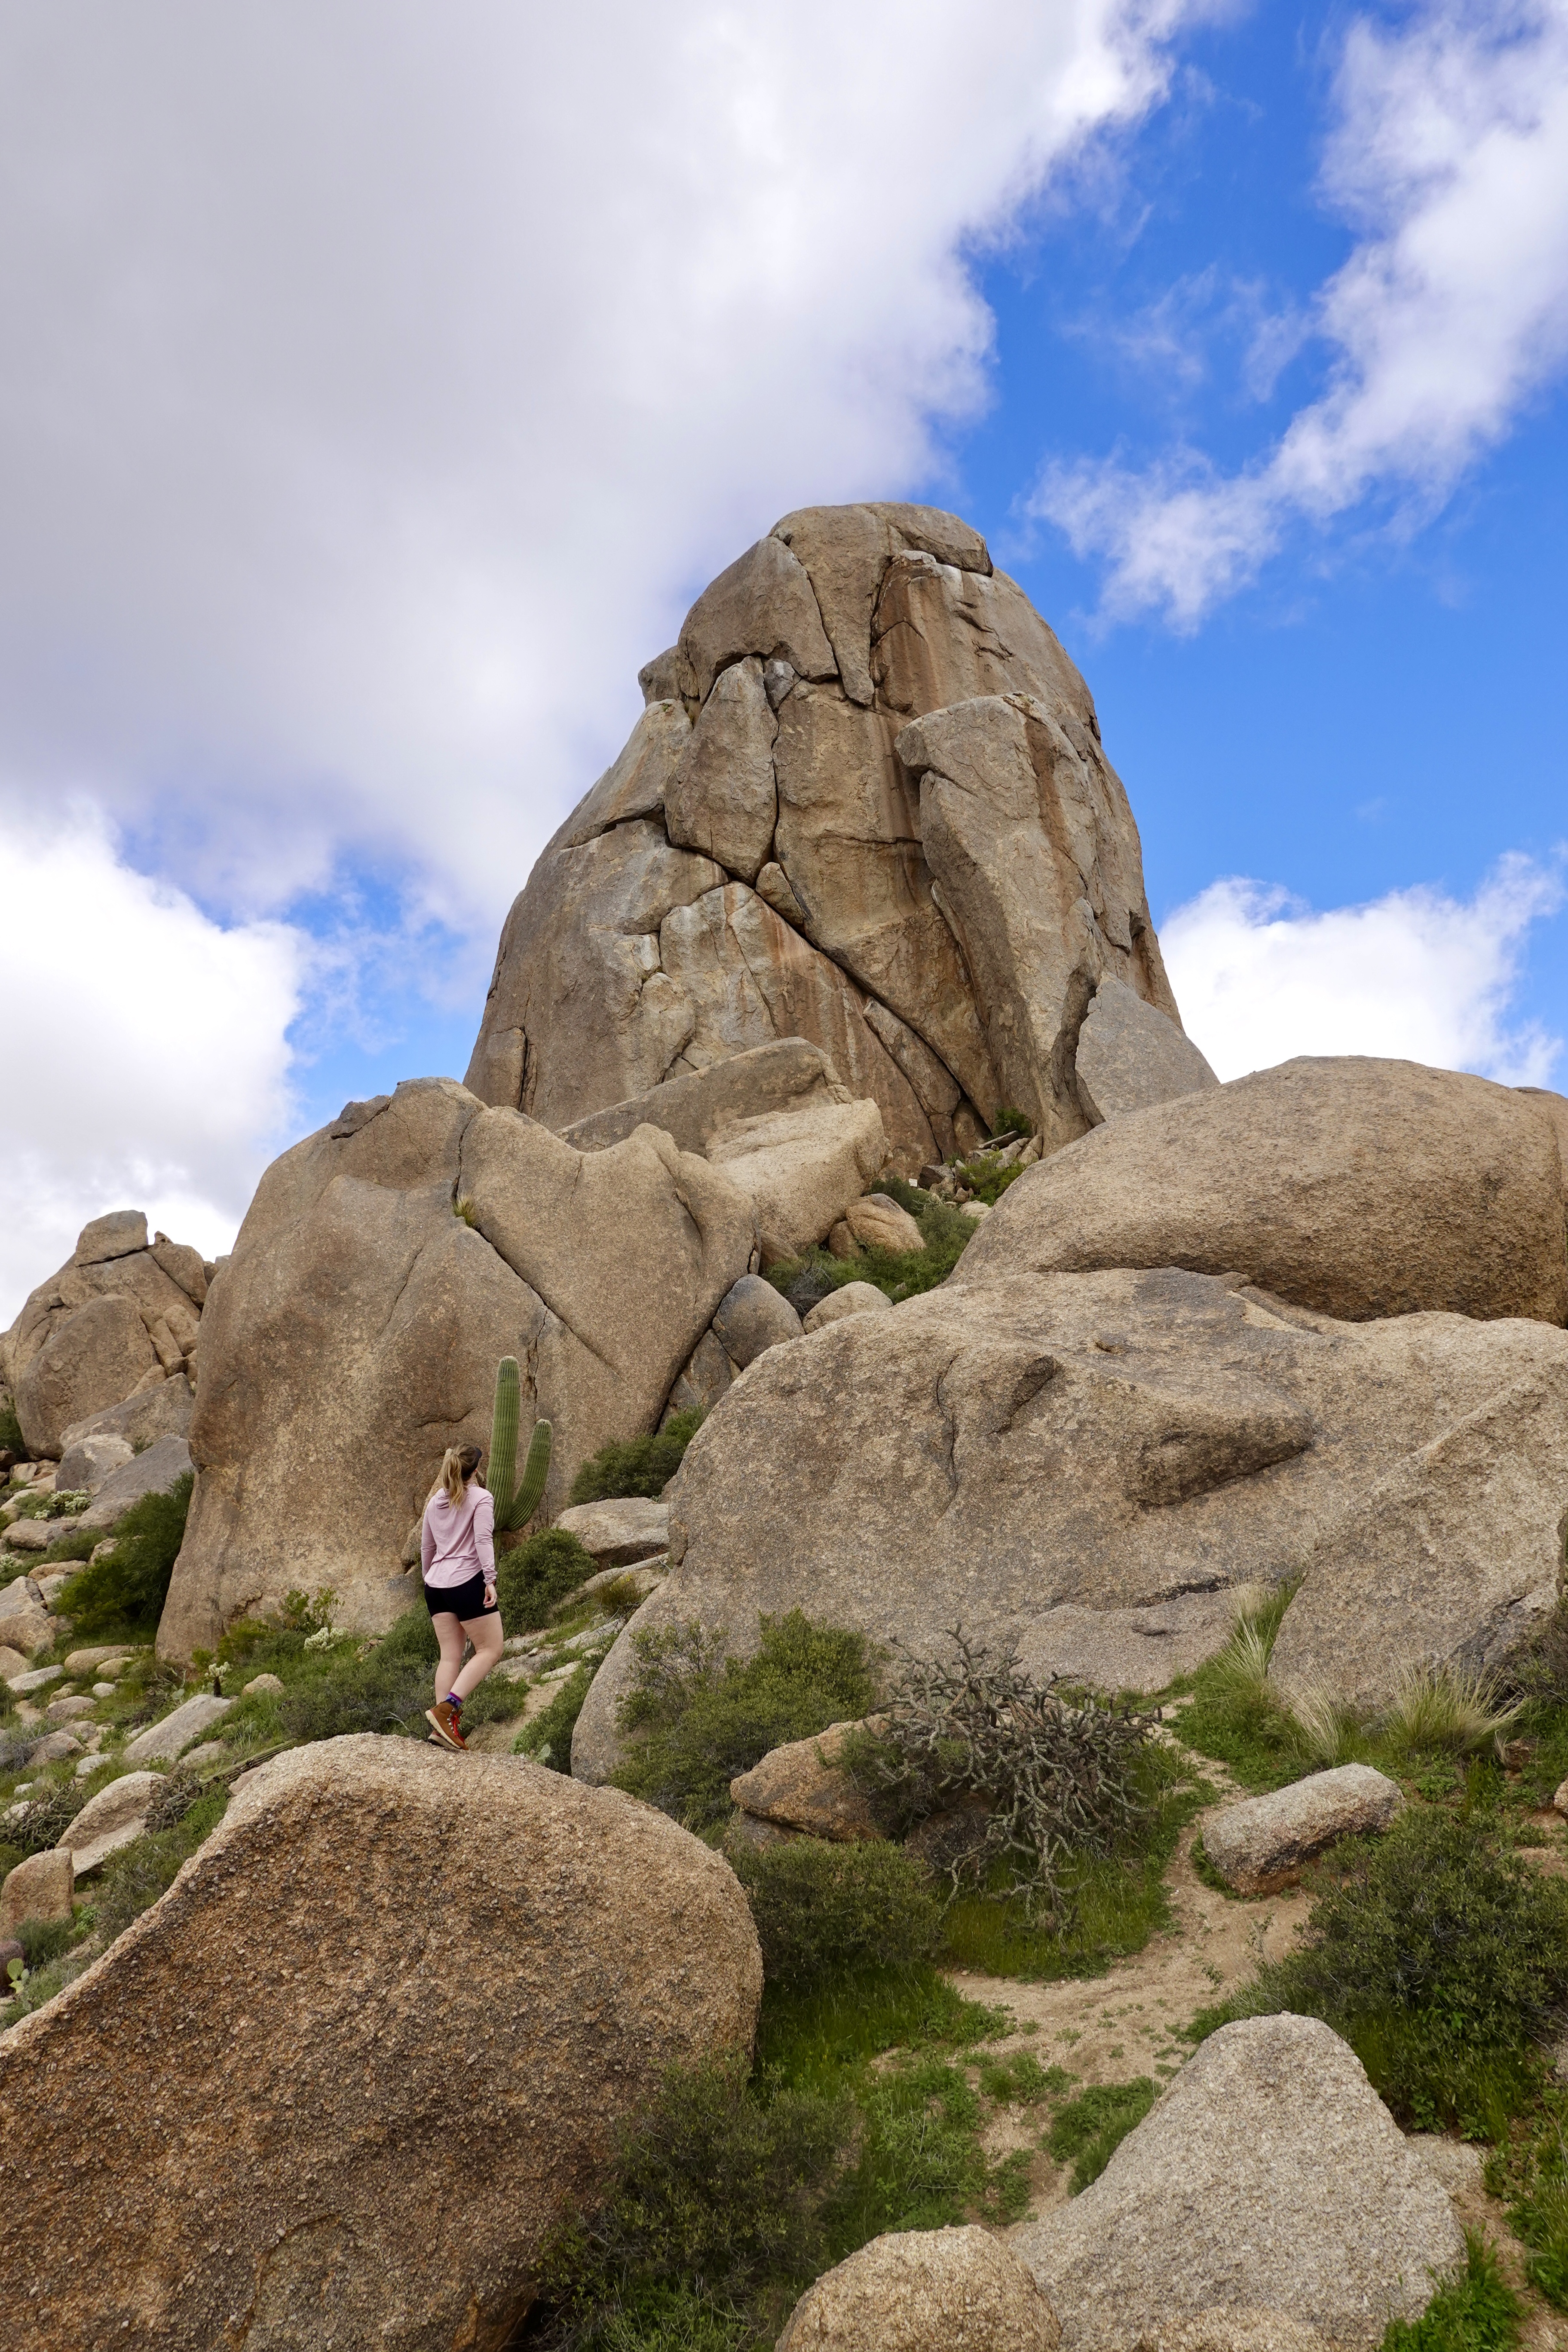 Tom’s Thumb Hike: One of Scottsdale’s Most Stunning Trails